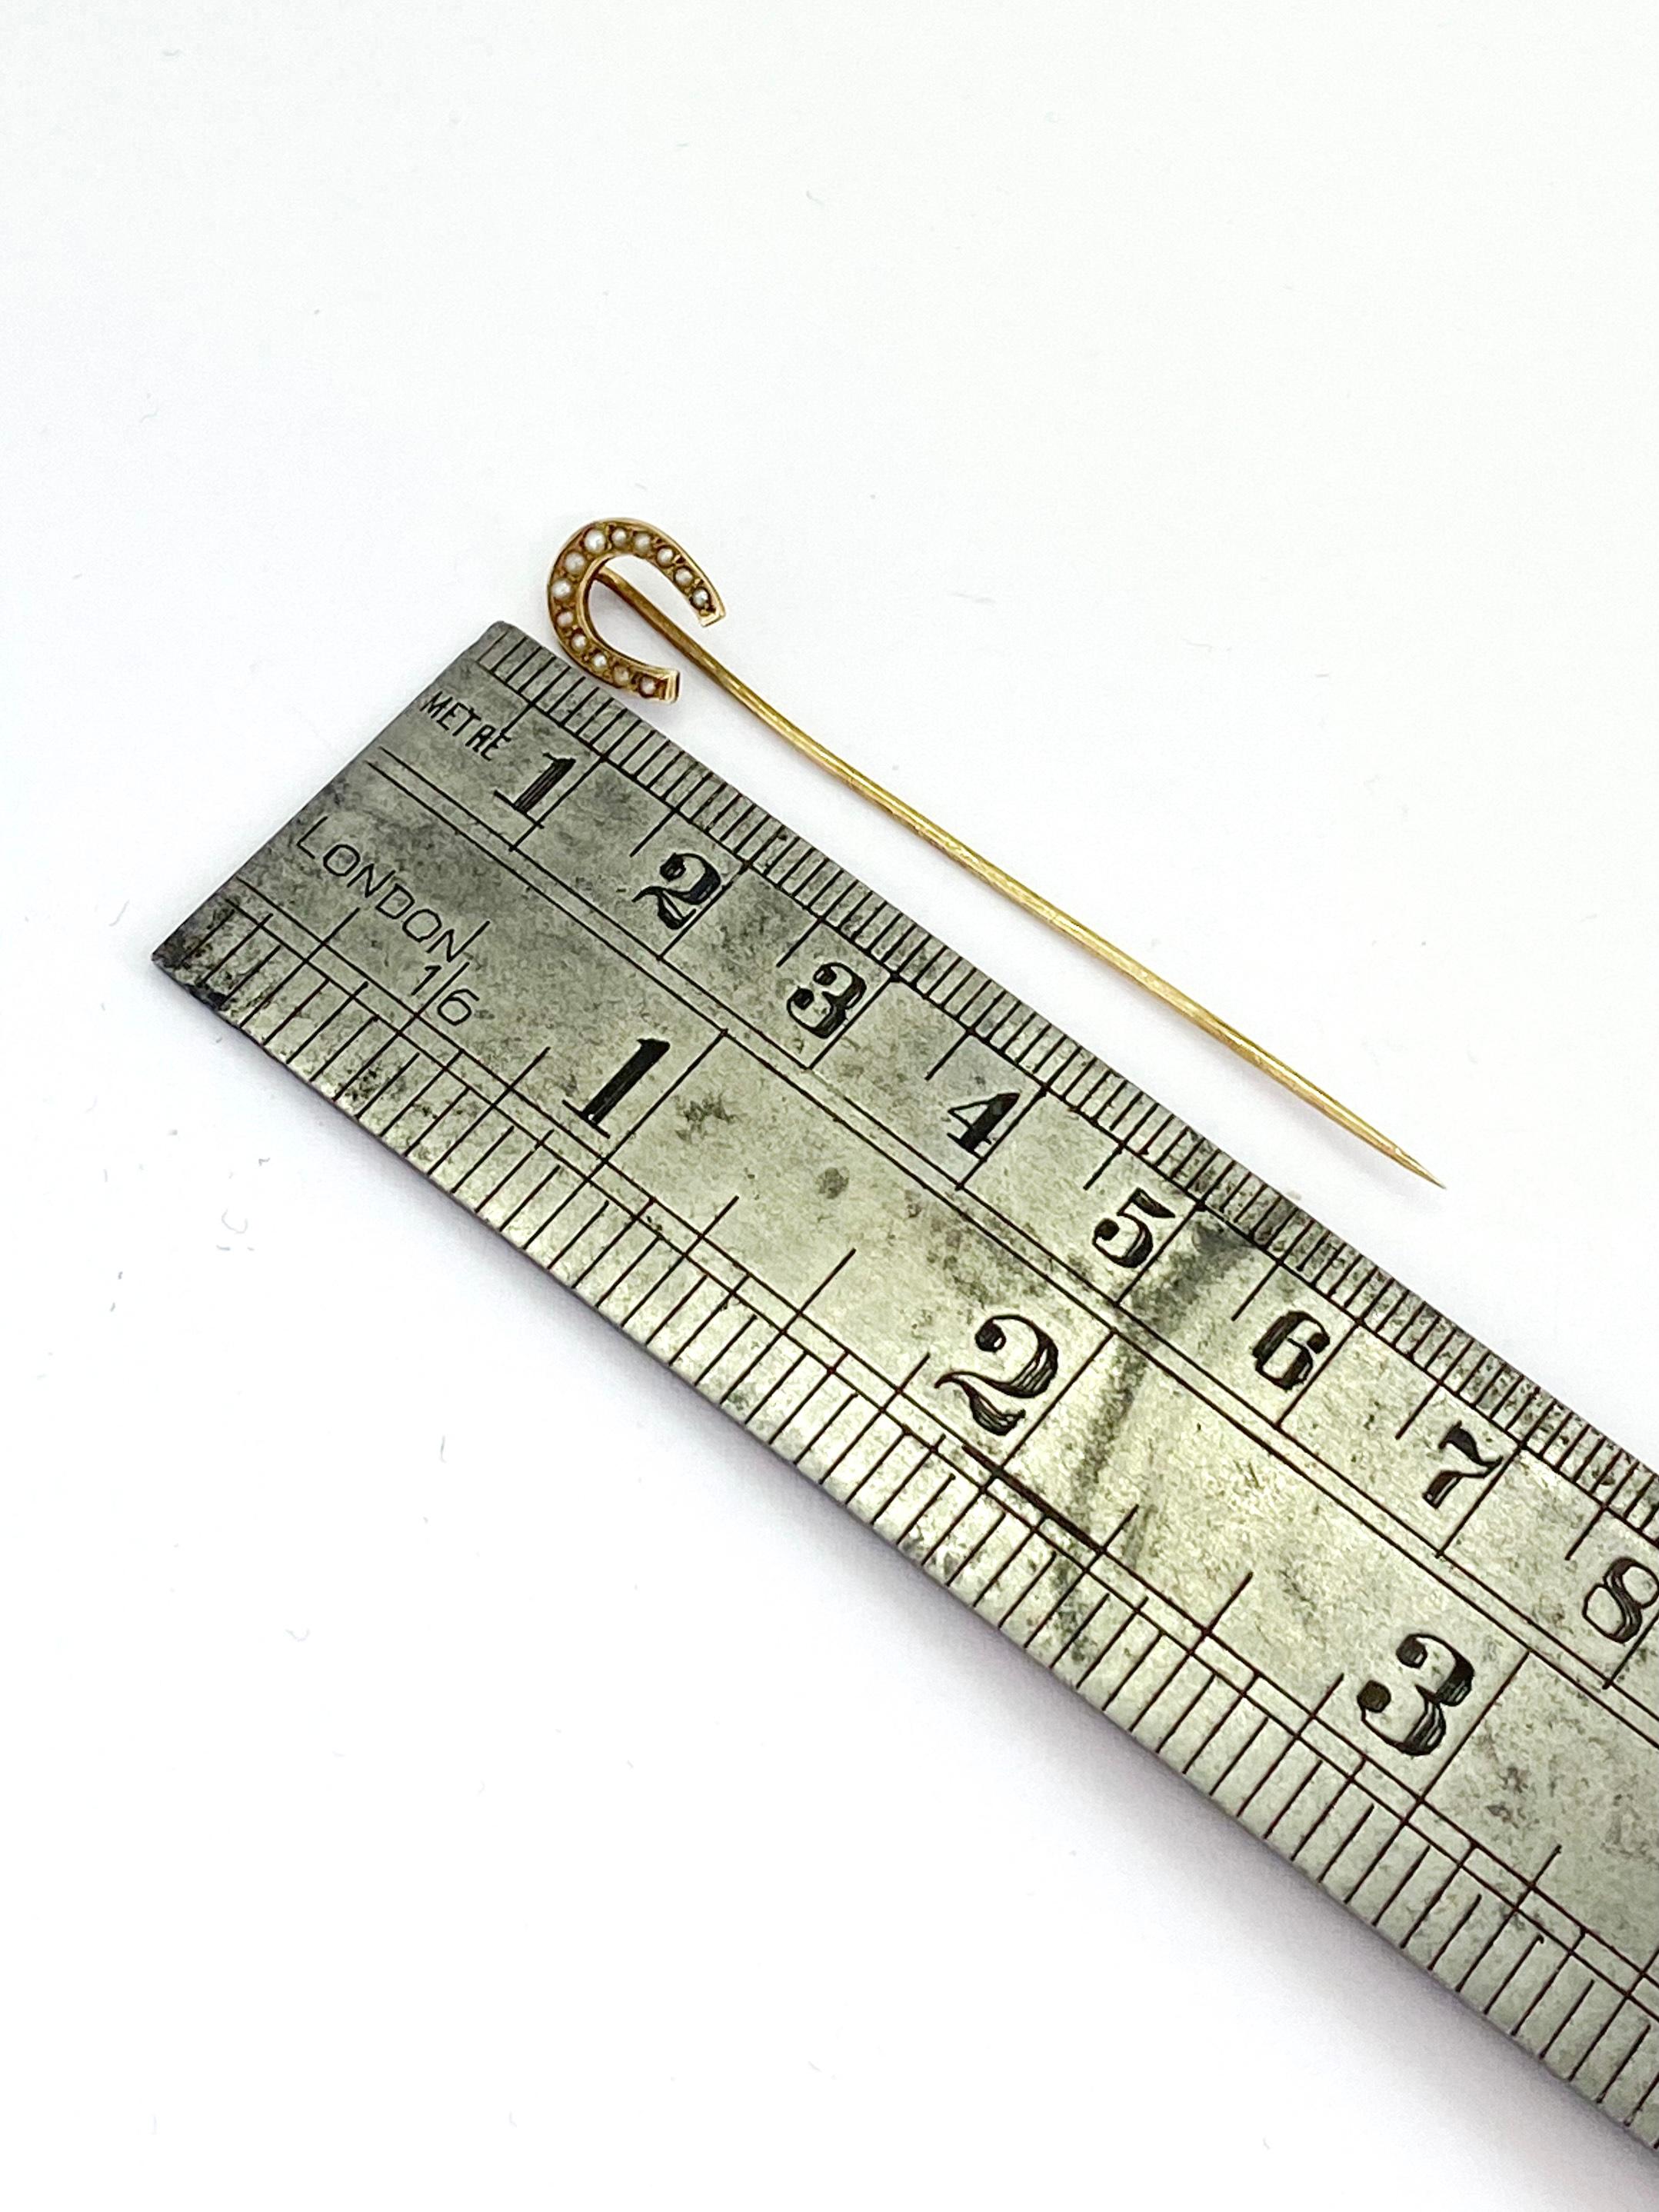 Stickpin 14 Karat Yellow Gold and Pearl.
I don't know where it's done.
Stamp 14K